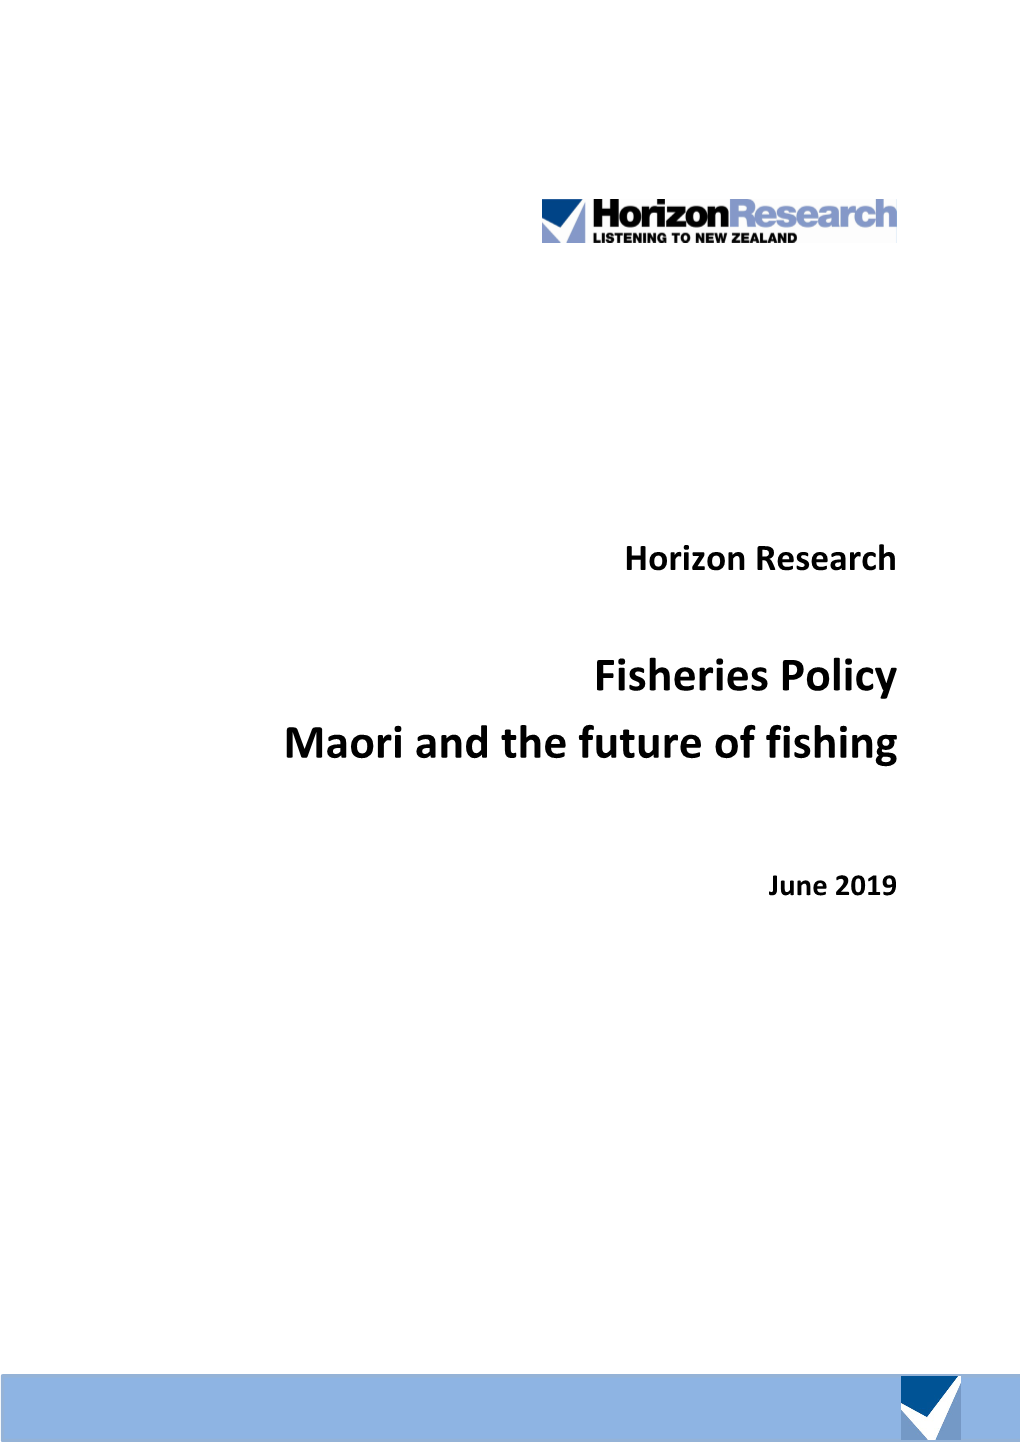 Fisheries Policy Maori and the Future of Fishing